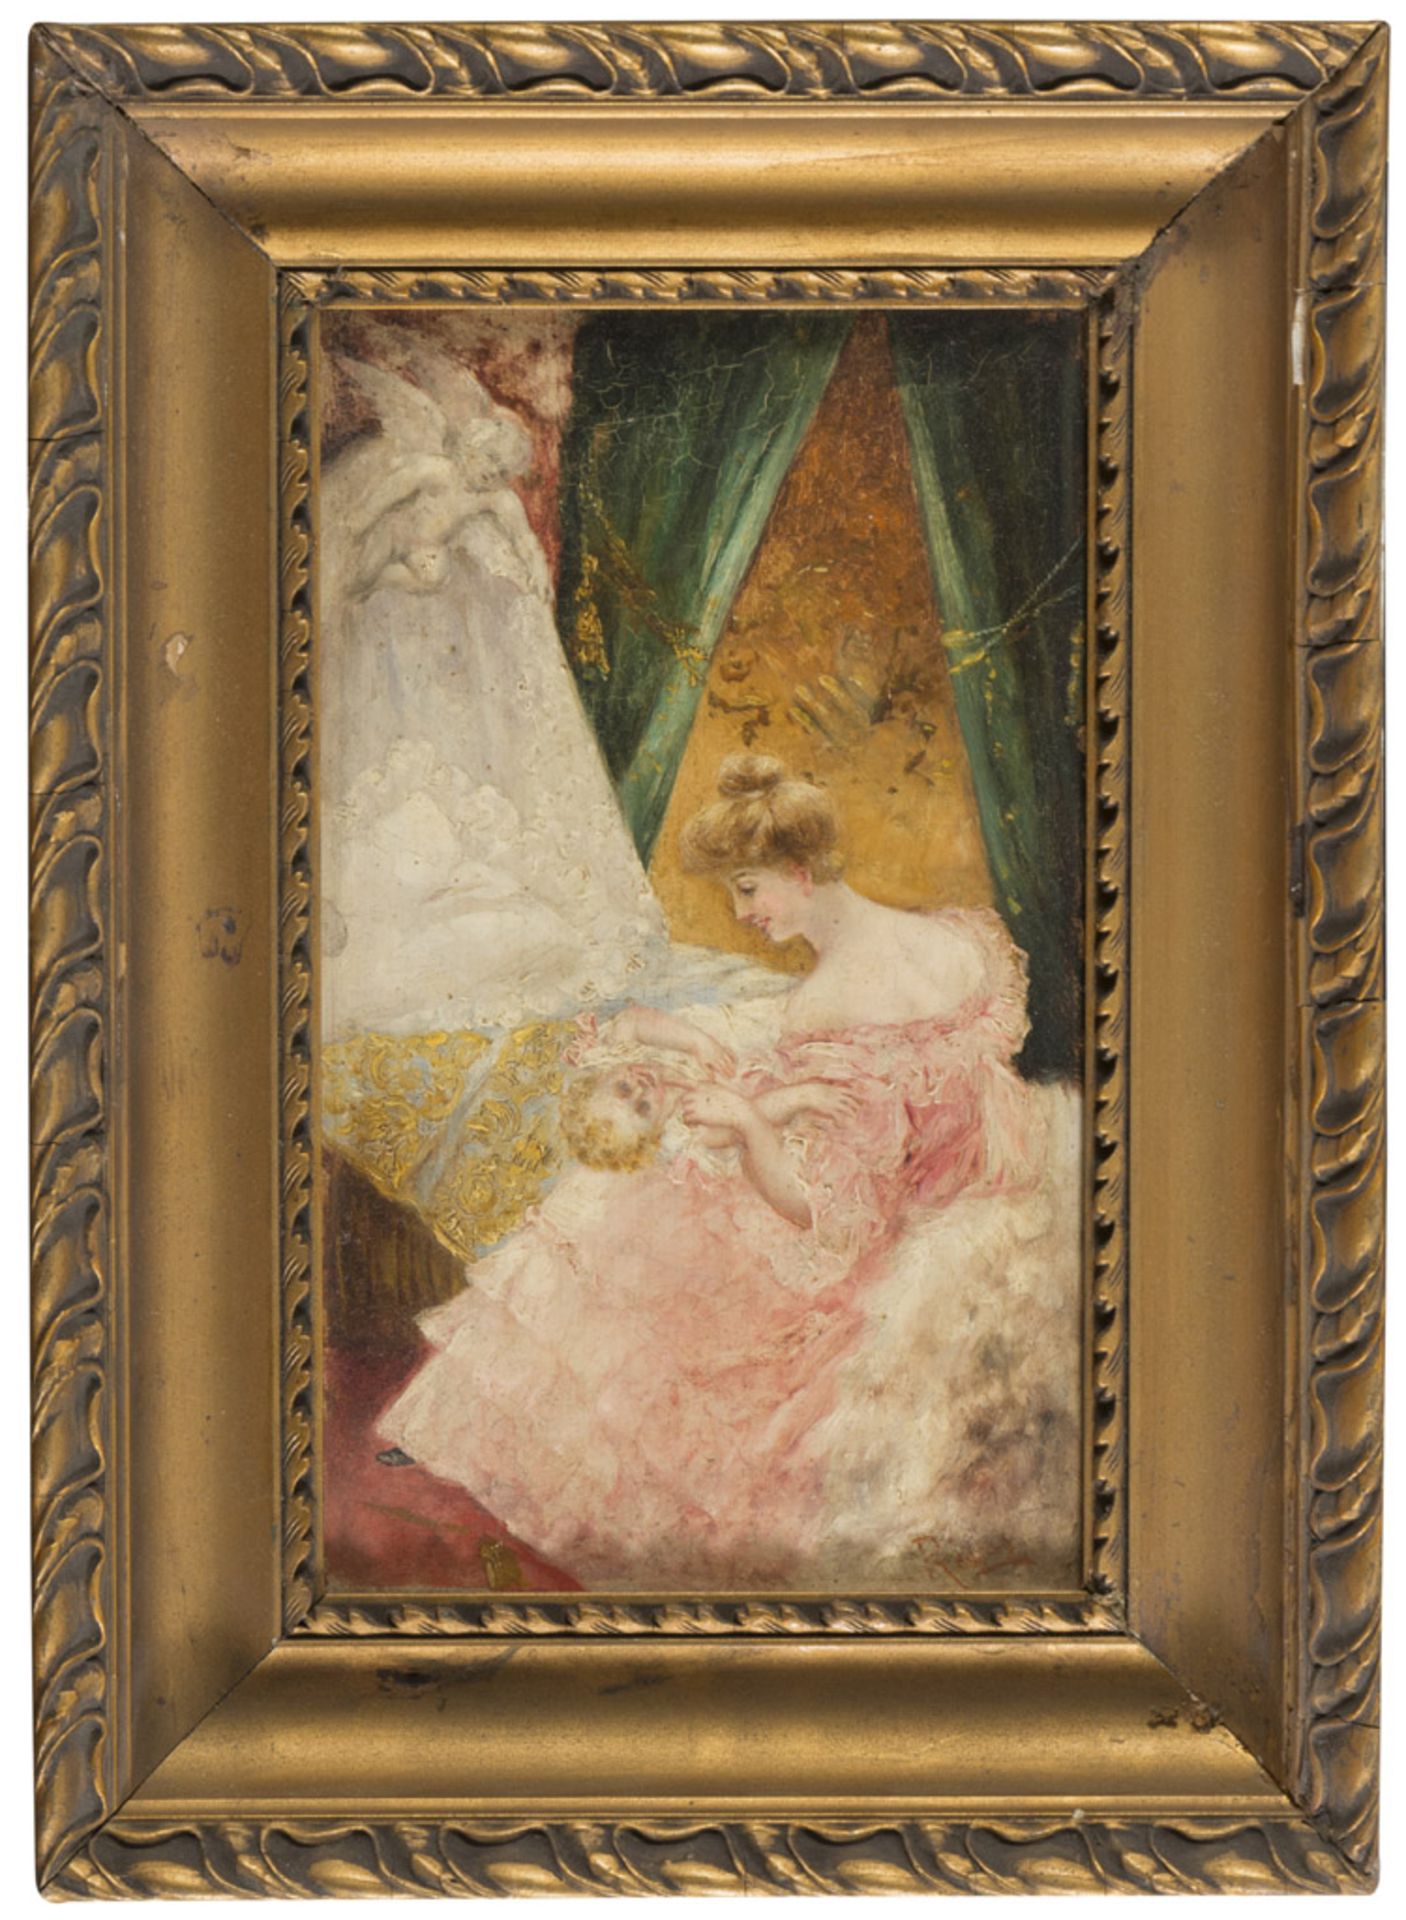 SICILIAN PAINTER, 19TH CENTURY WOMAN WITH CHILD IN TULE SUIT AND CHERUB Oil on canvas, cm. 24 x 14